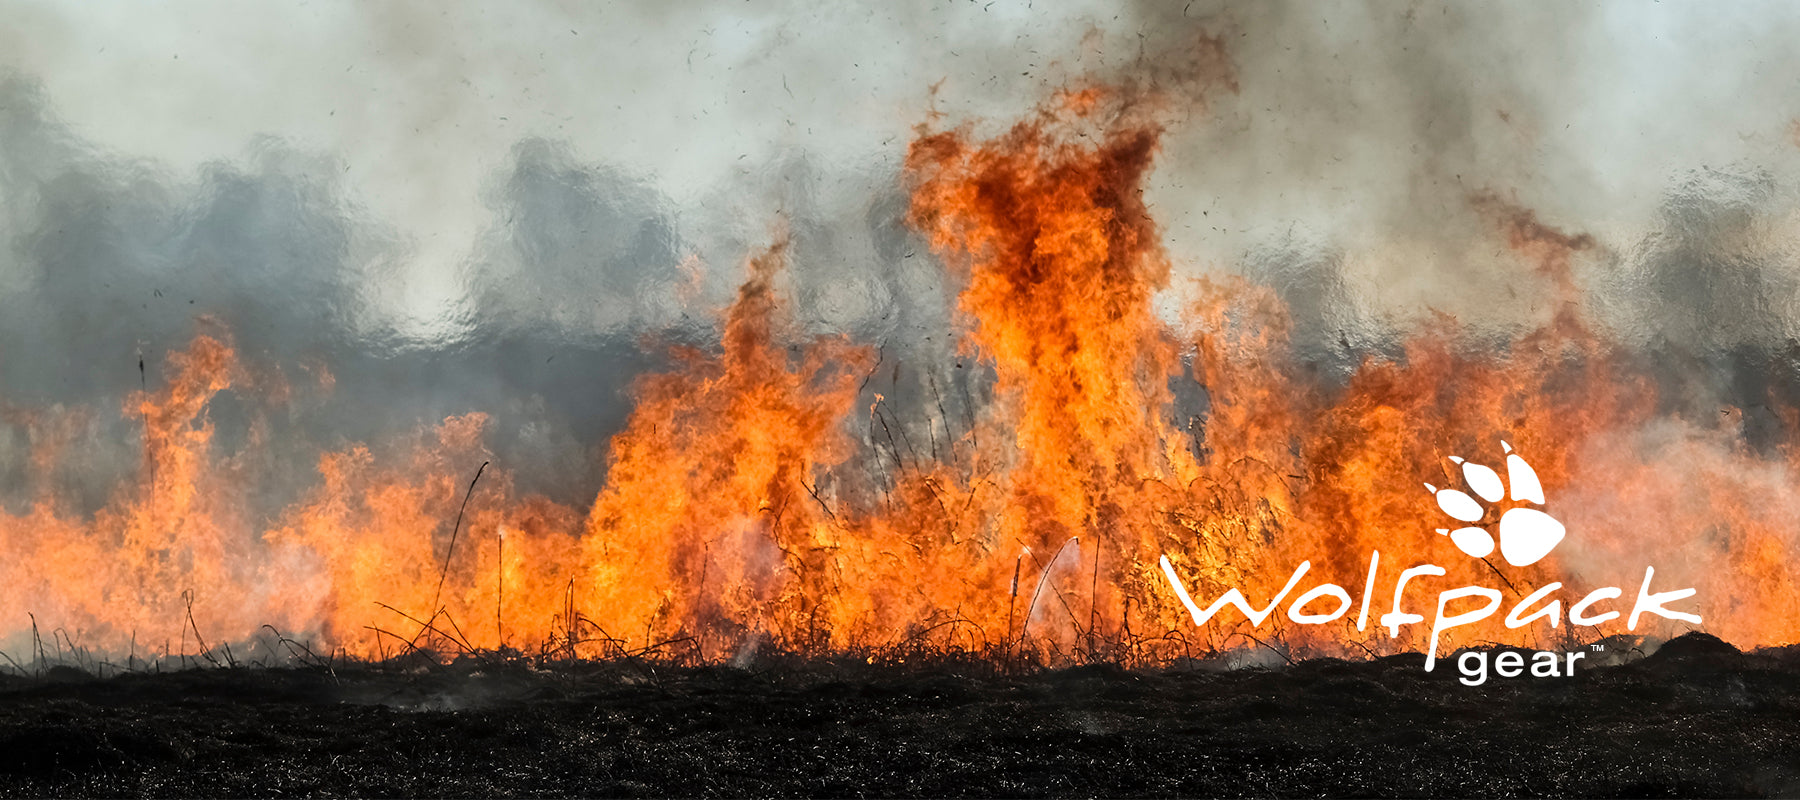 Wolfpack Gear™ - image of wildland grass fire with Wolfpack Gear™ Logo